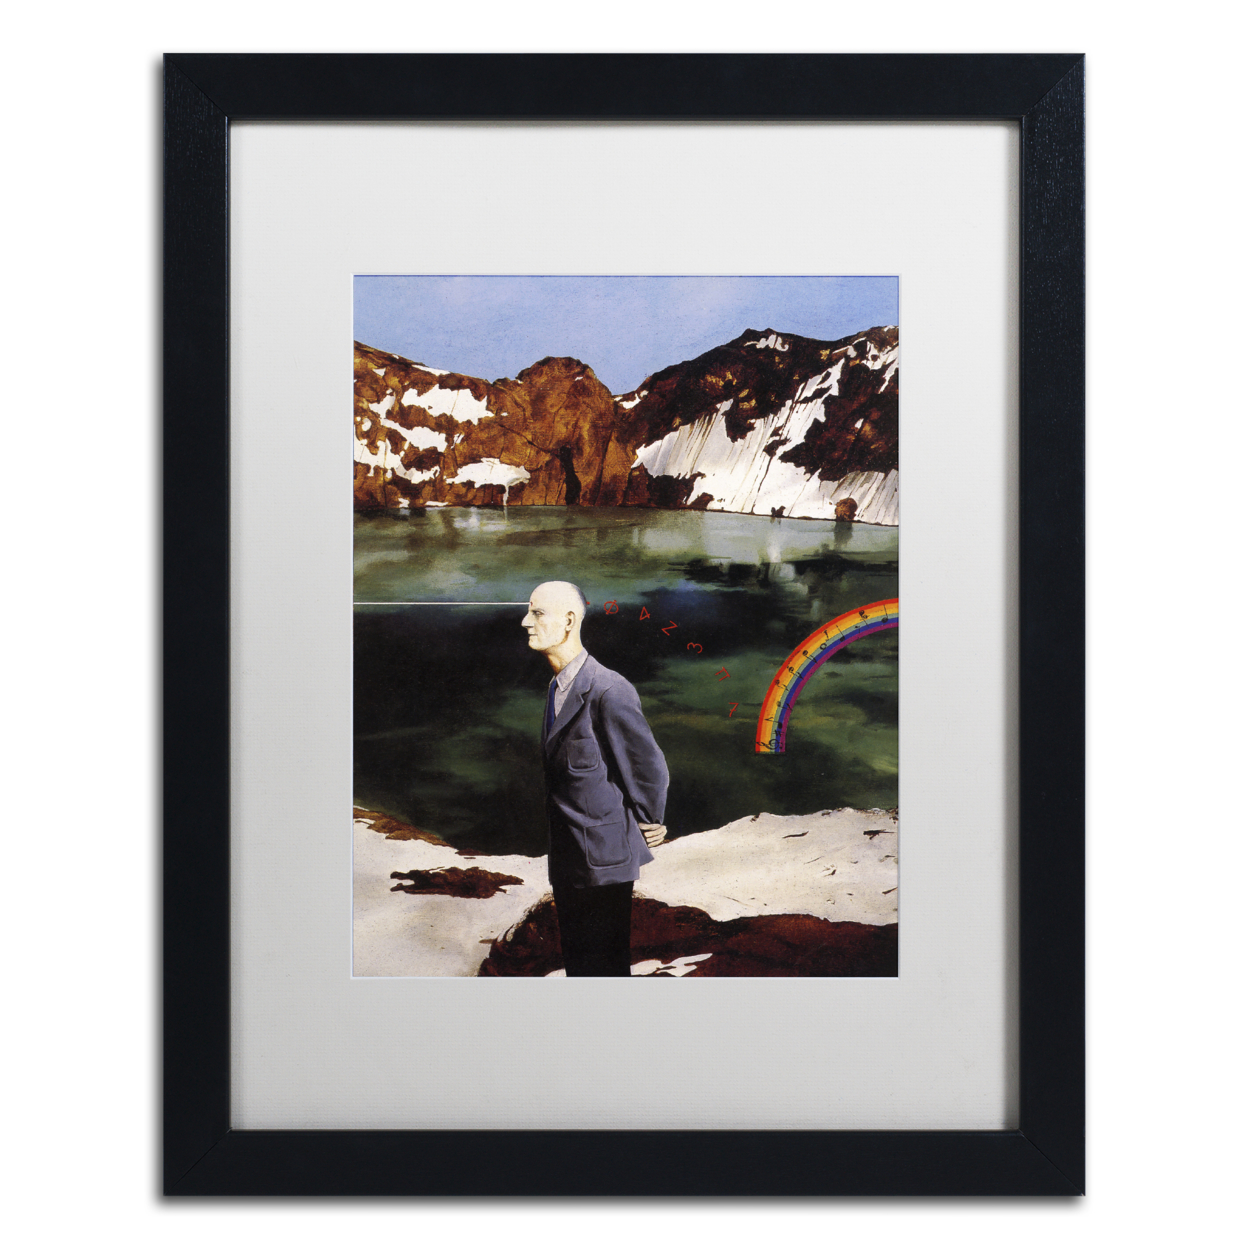 Nick Bantock 'Wicklow' Black Wooden Framed Art 18 X 22 Inches